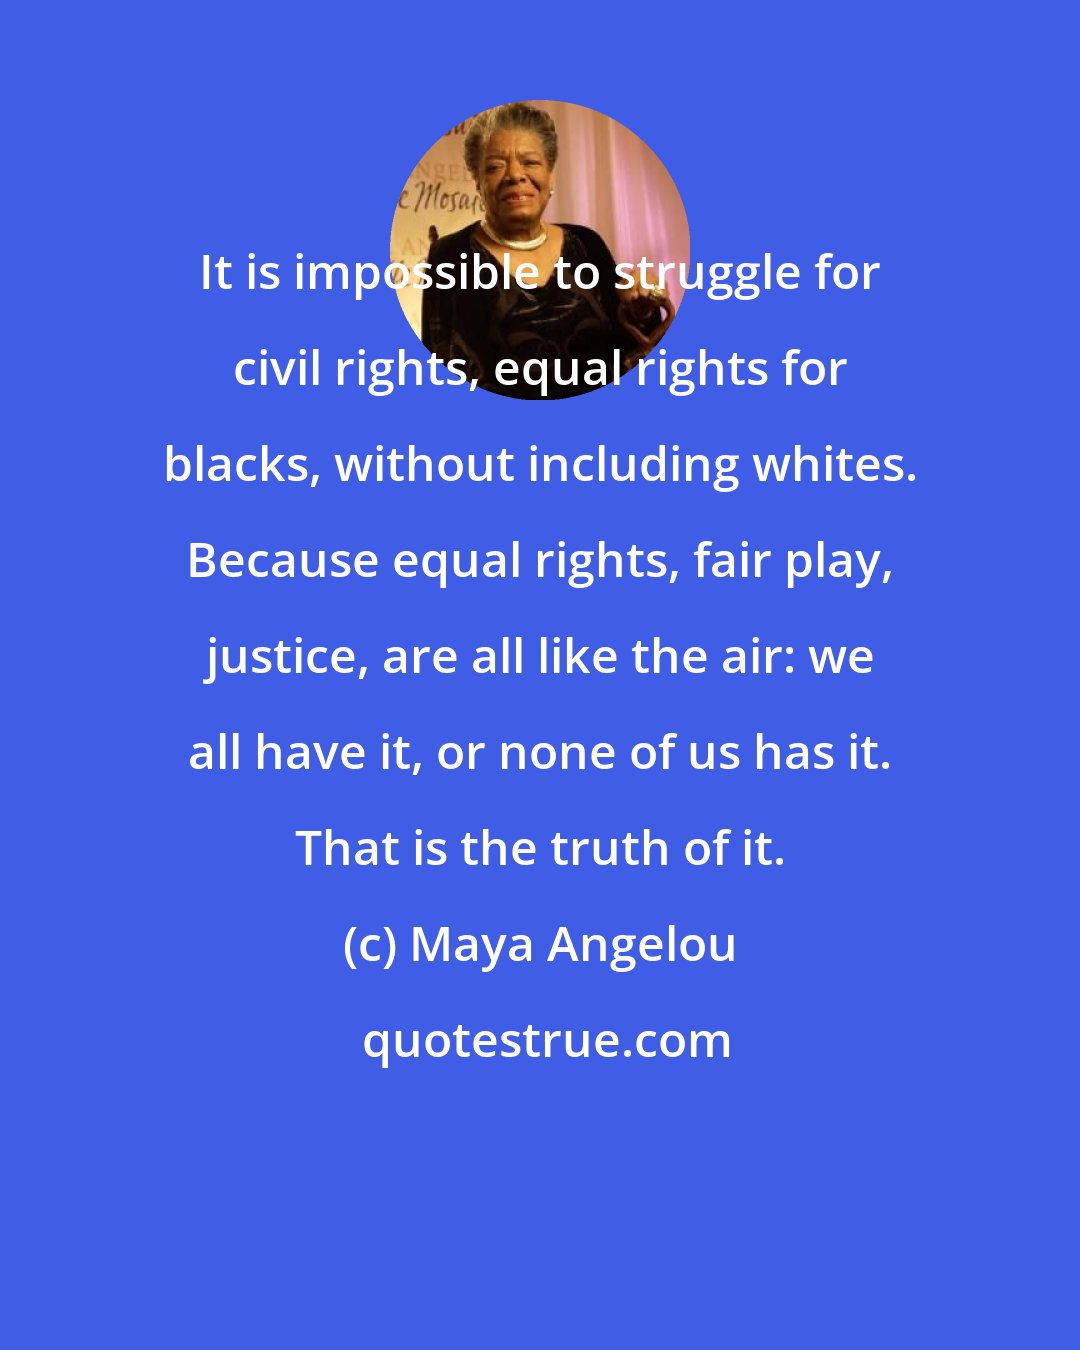 Maya Angelou: It is impossible to struggle for civil rights, equal rights for blacks, without including whites. Because equal rights, fair play, justice, are all like the air: we all have it, or none of us has it. That is the truth of it.